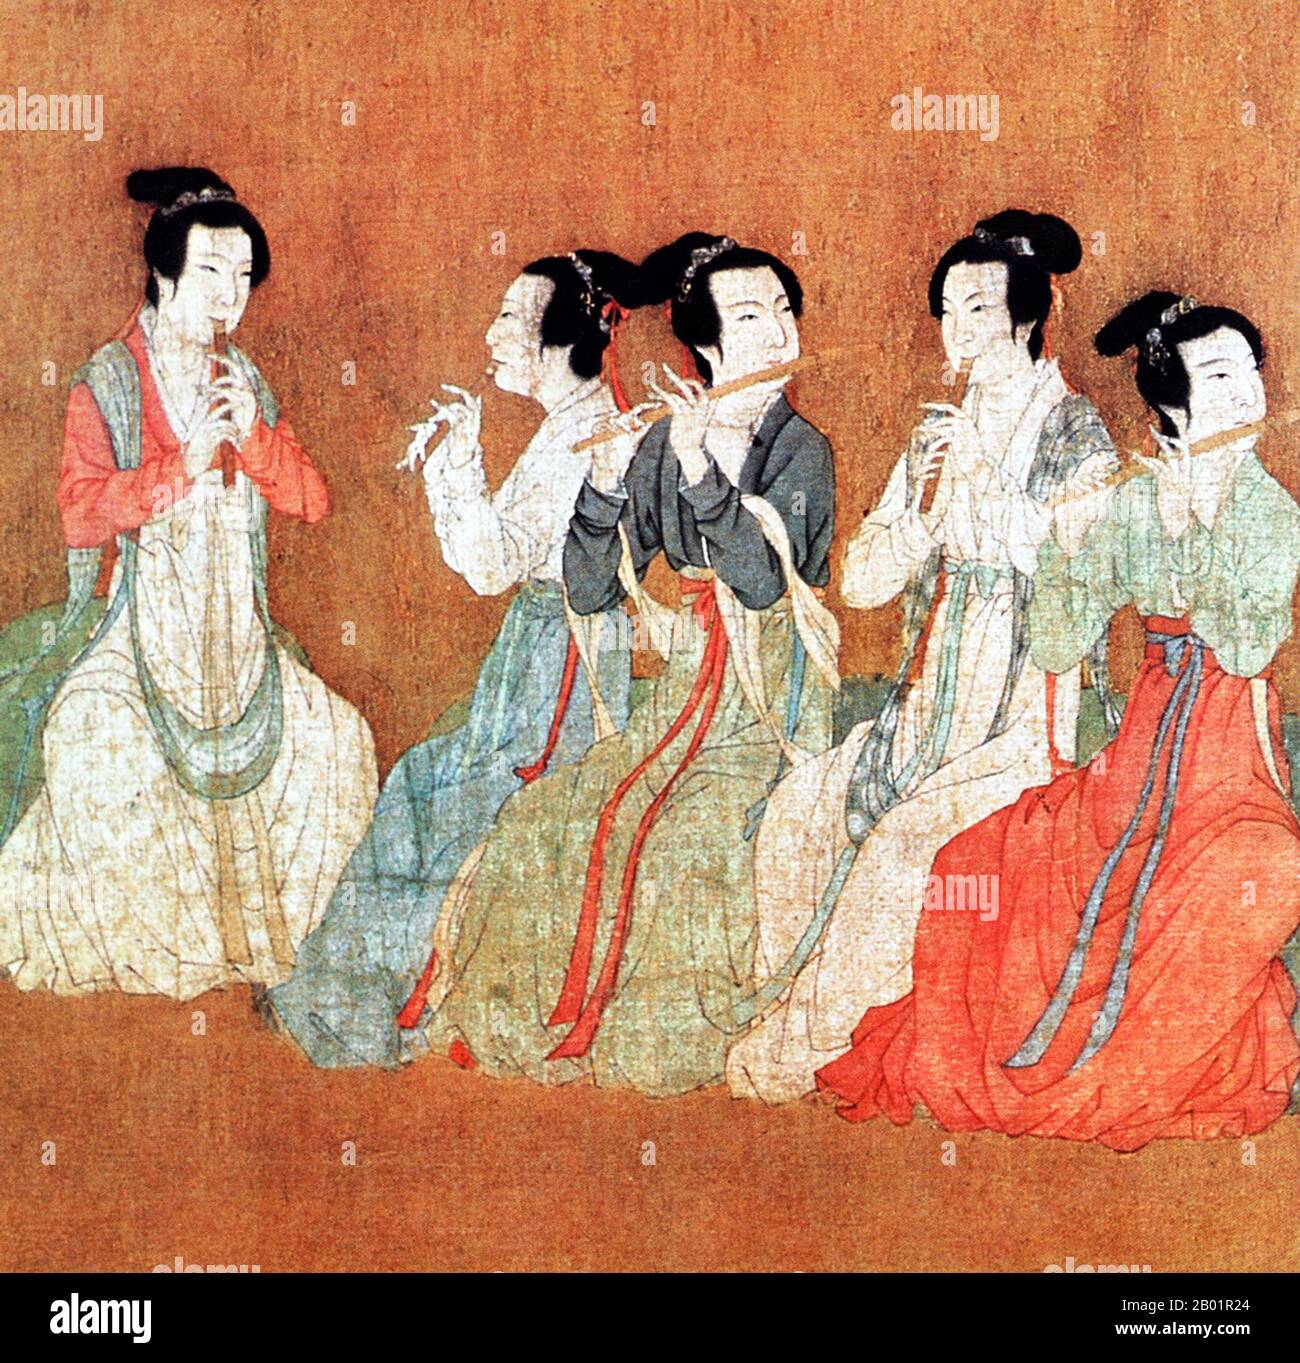 China: Five women playing flutes. Detail from the handscroll painting 'Night Revels of Han Xizai' by Gu Hongzhong (937-975), later Song Dynasty (960-1279) remake of a 10th century original.  The Night Revels of Han Xizai is a painted scroll depicting Han Xizai, a minister of the Southern Tang Emperor Li Yu (937-978). This narrative painting is split into five distinct sections: Han Xizai listens to the pipa, watches dancers, takes a rest, plays string instruments and then sees guests off. Stock Photo